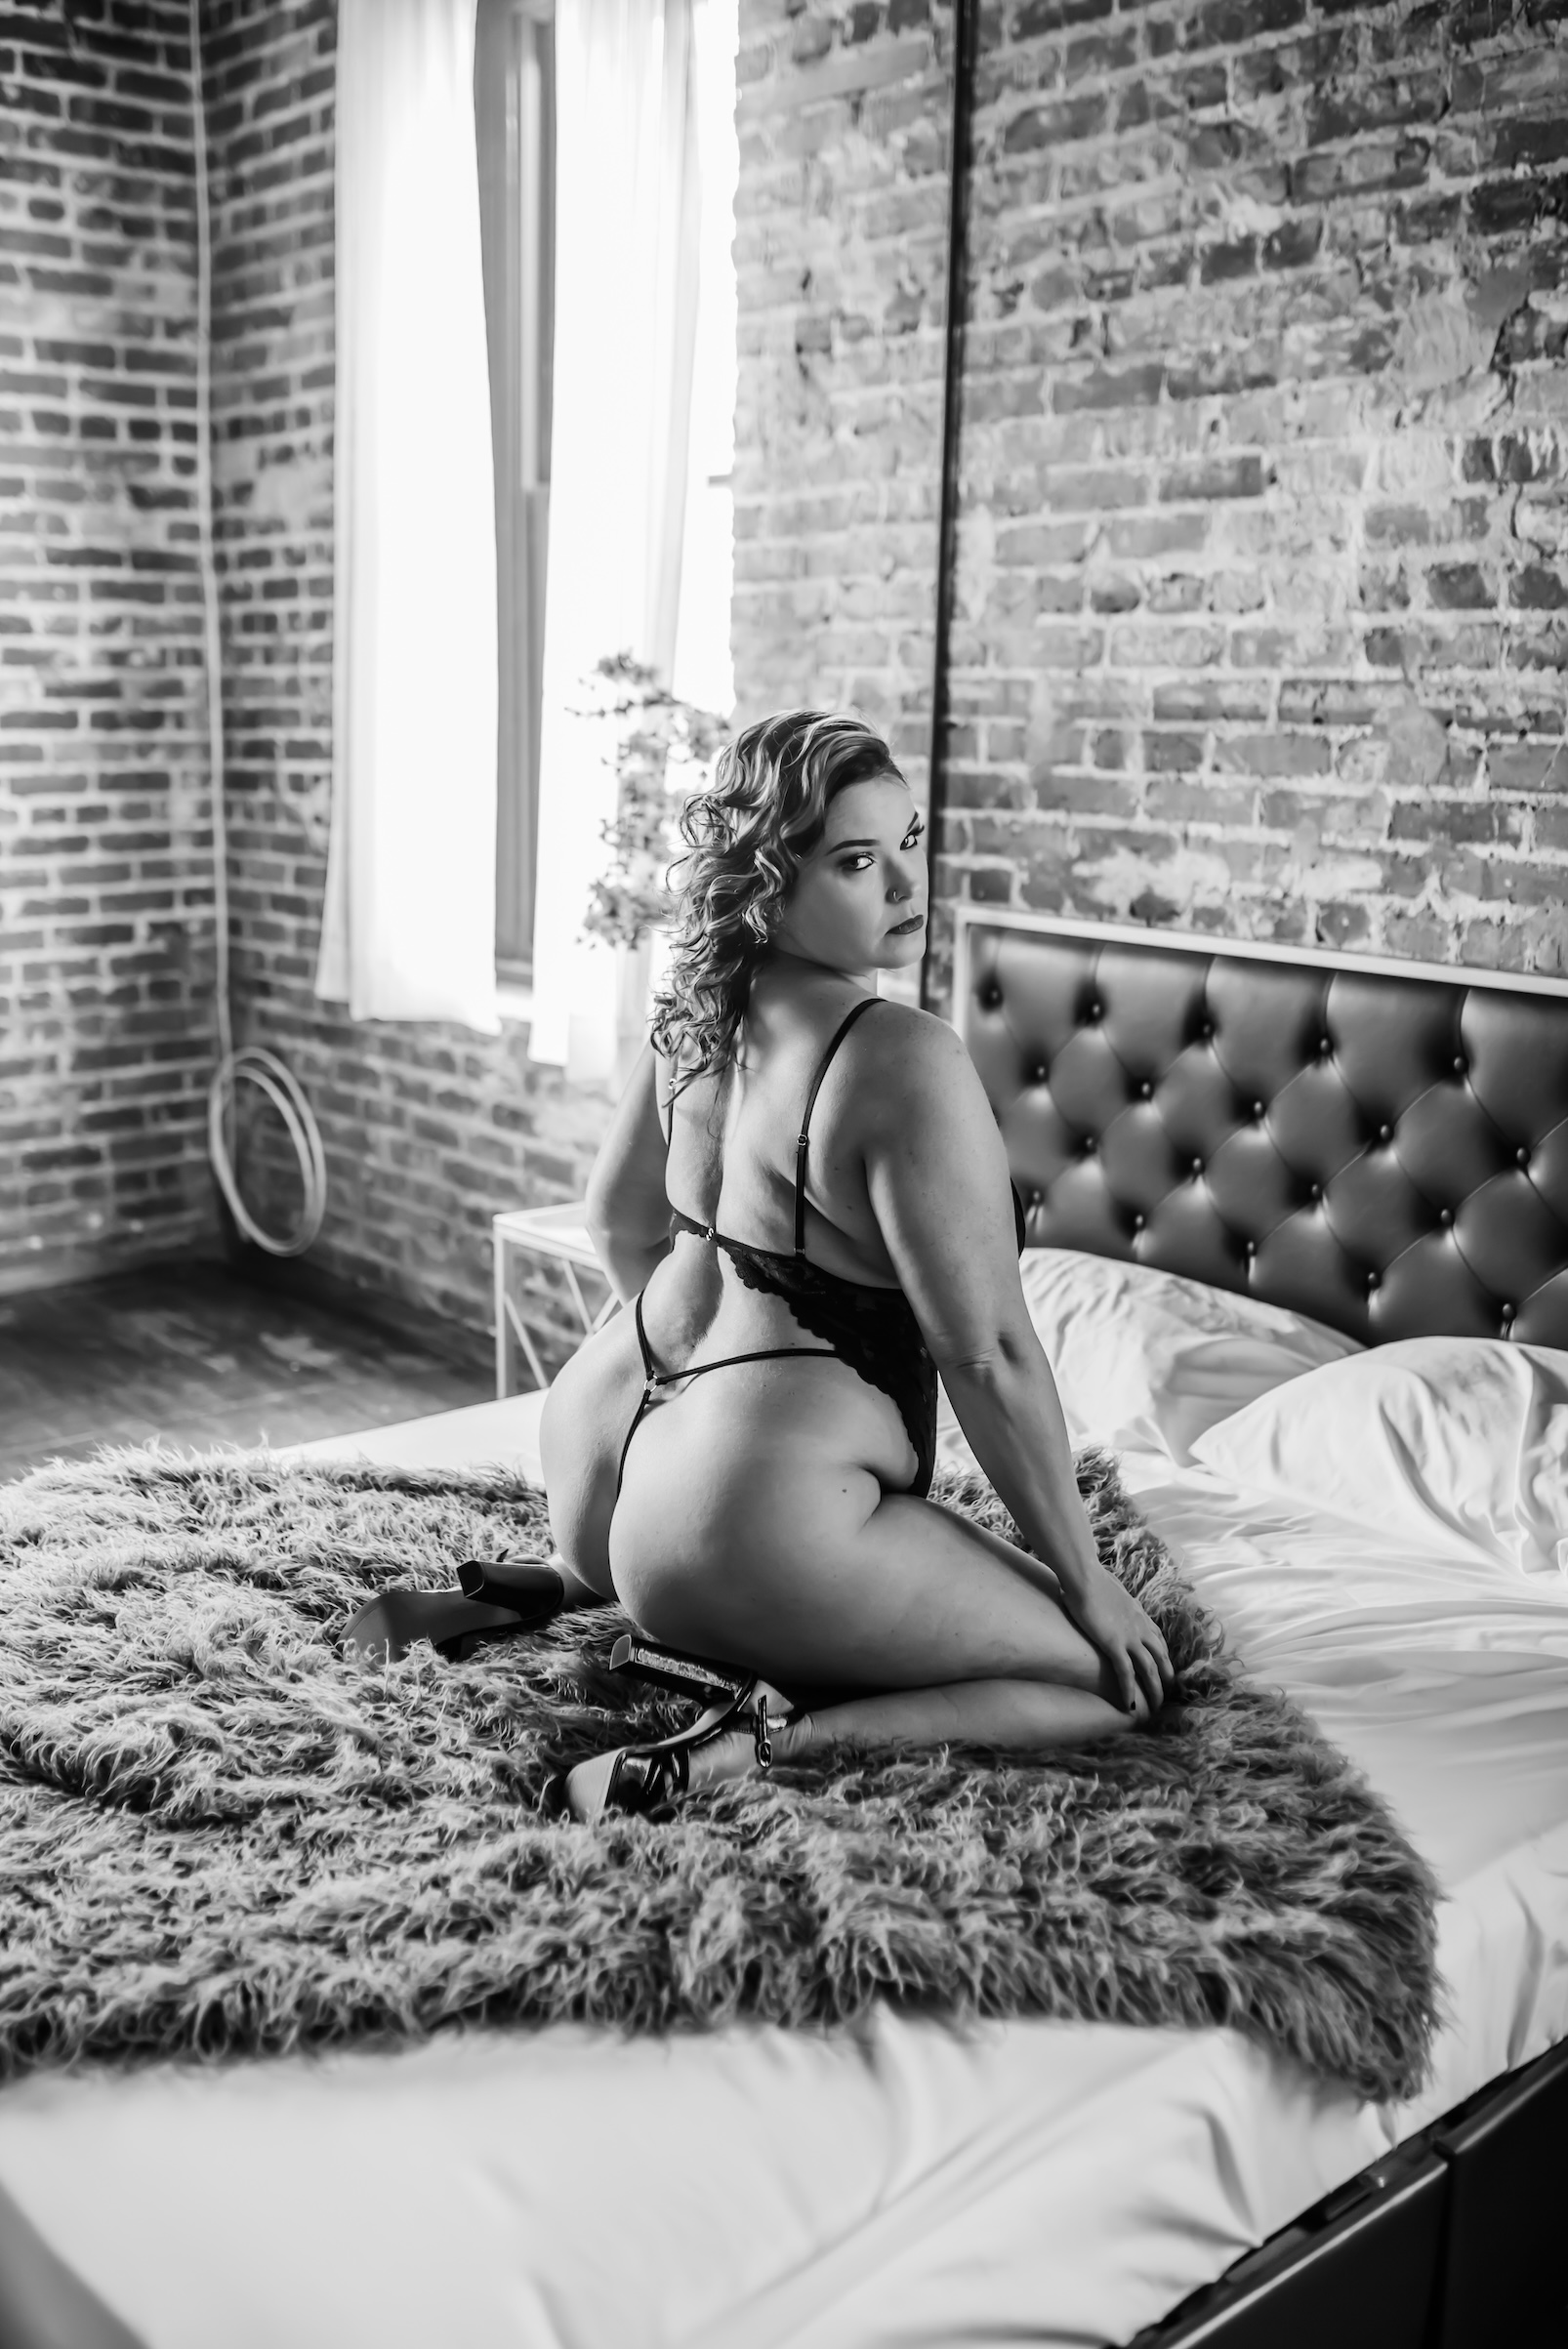 black and white photo of woman kneeling on bed while wearing lingerie